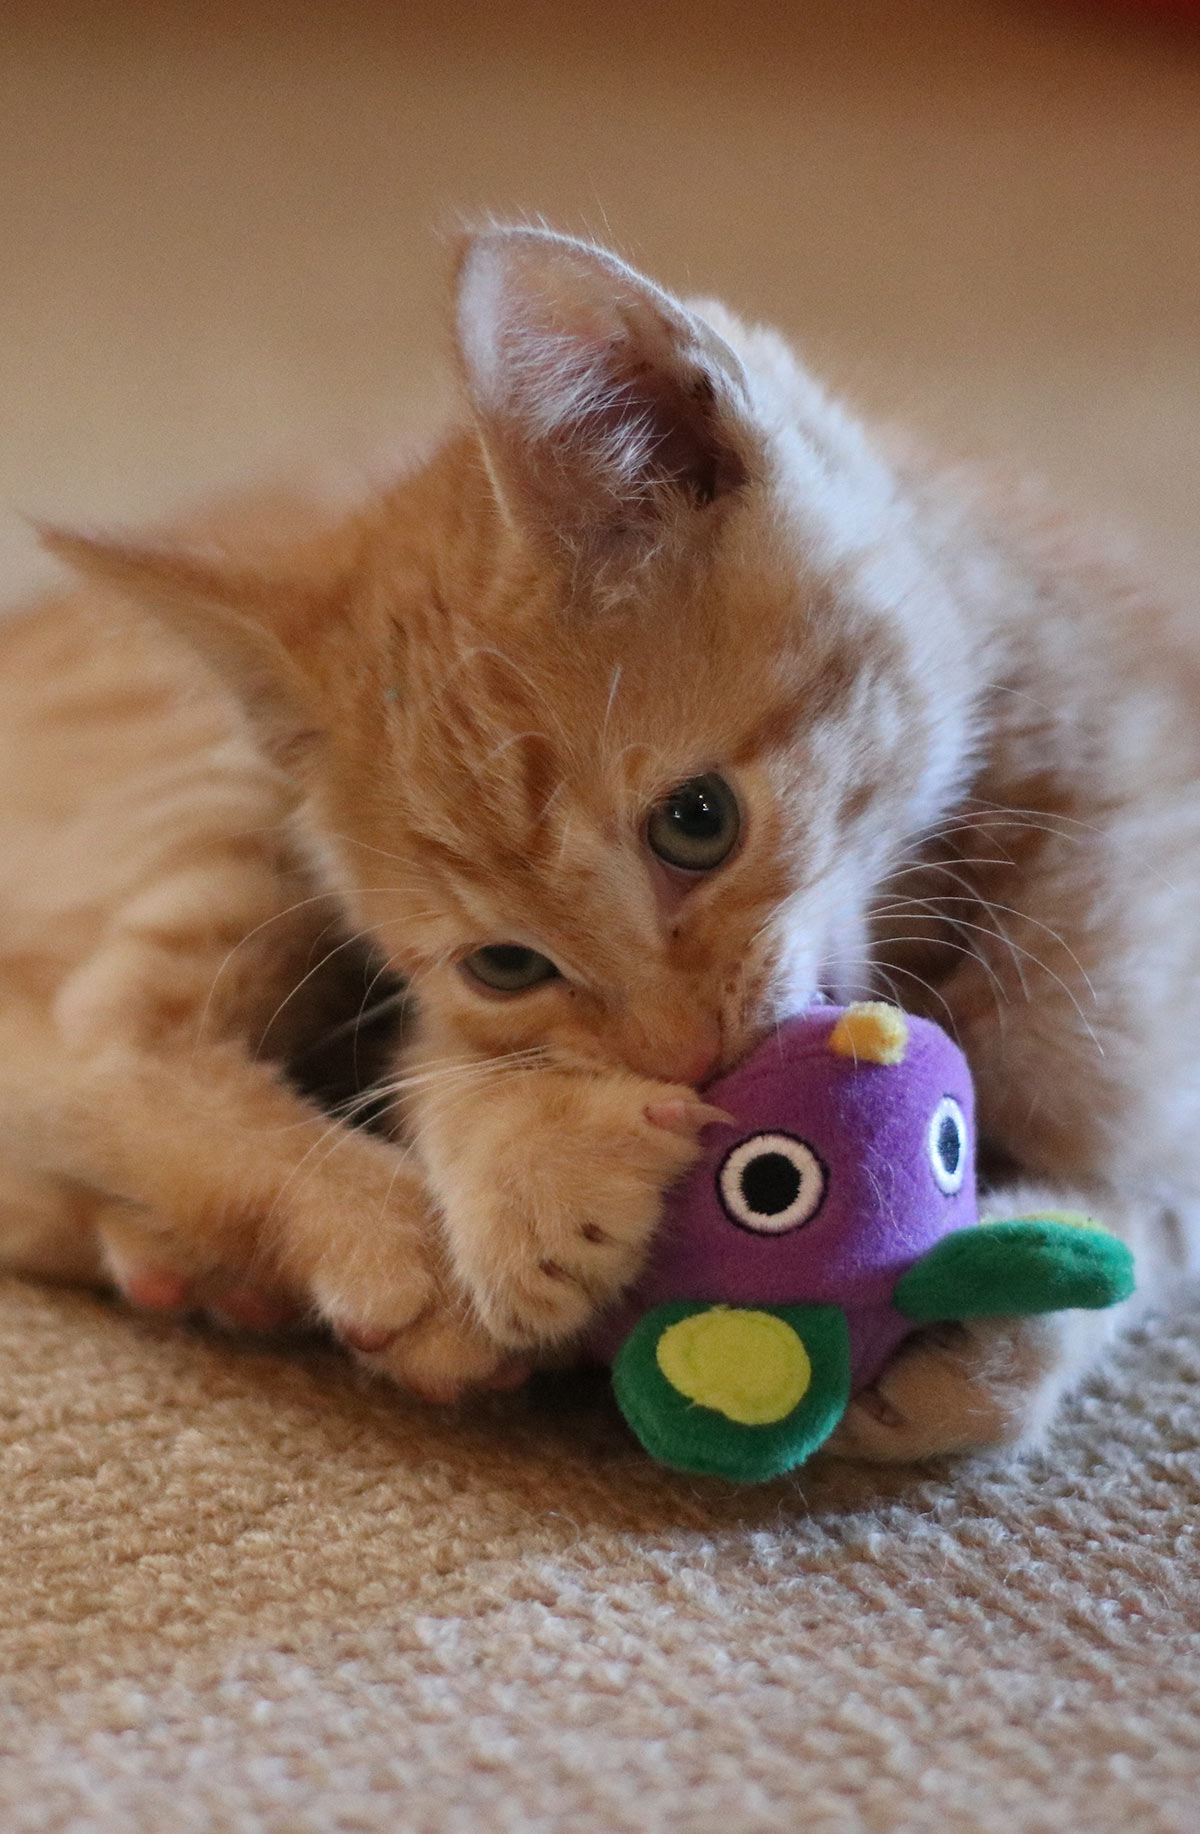 This is Billy's favorite toy - follow Billy's story on Billy's Blog